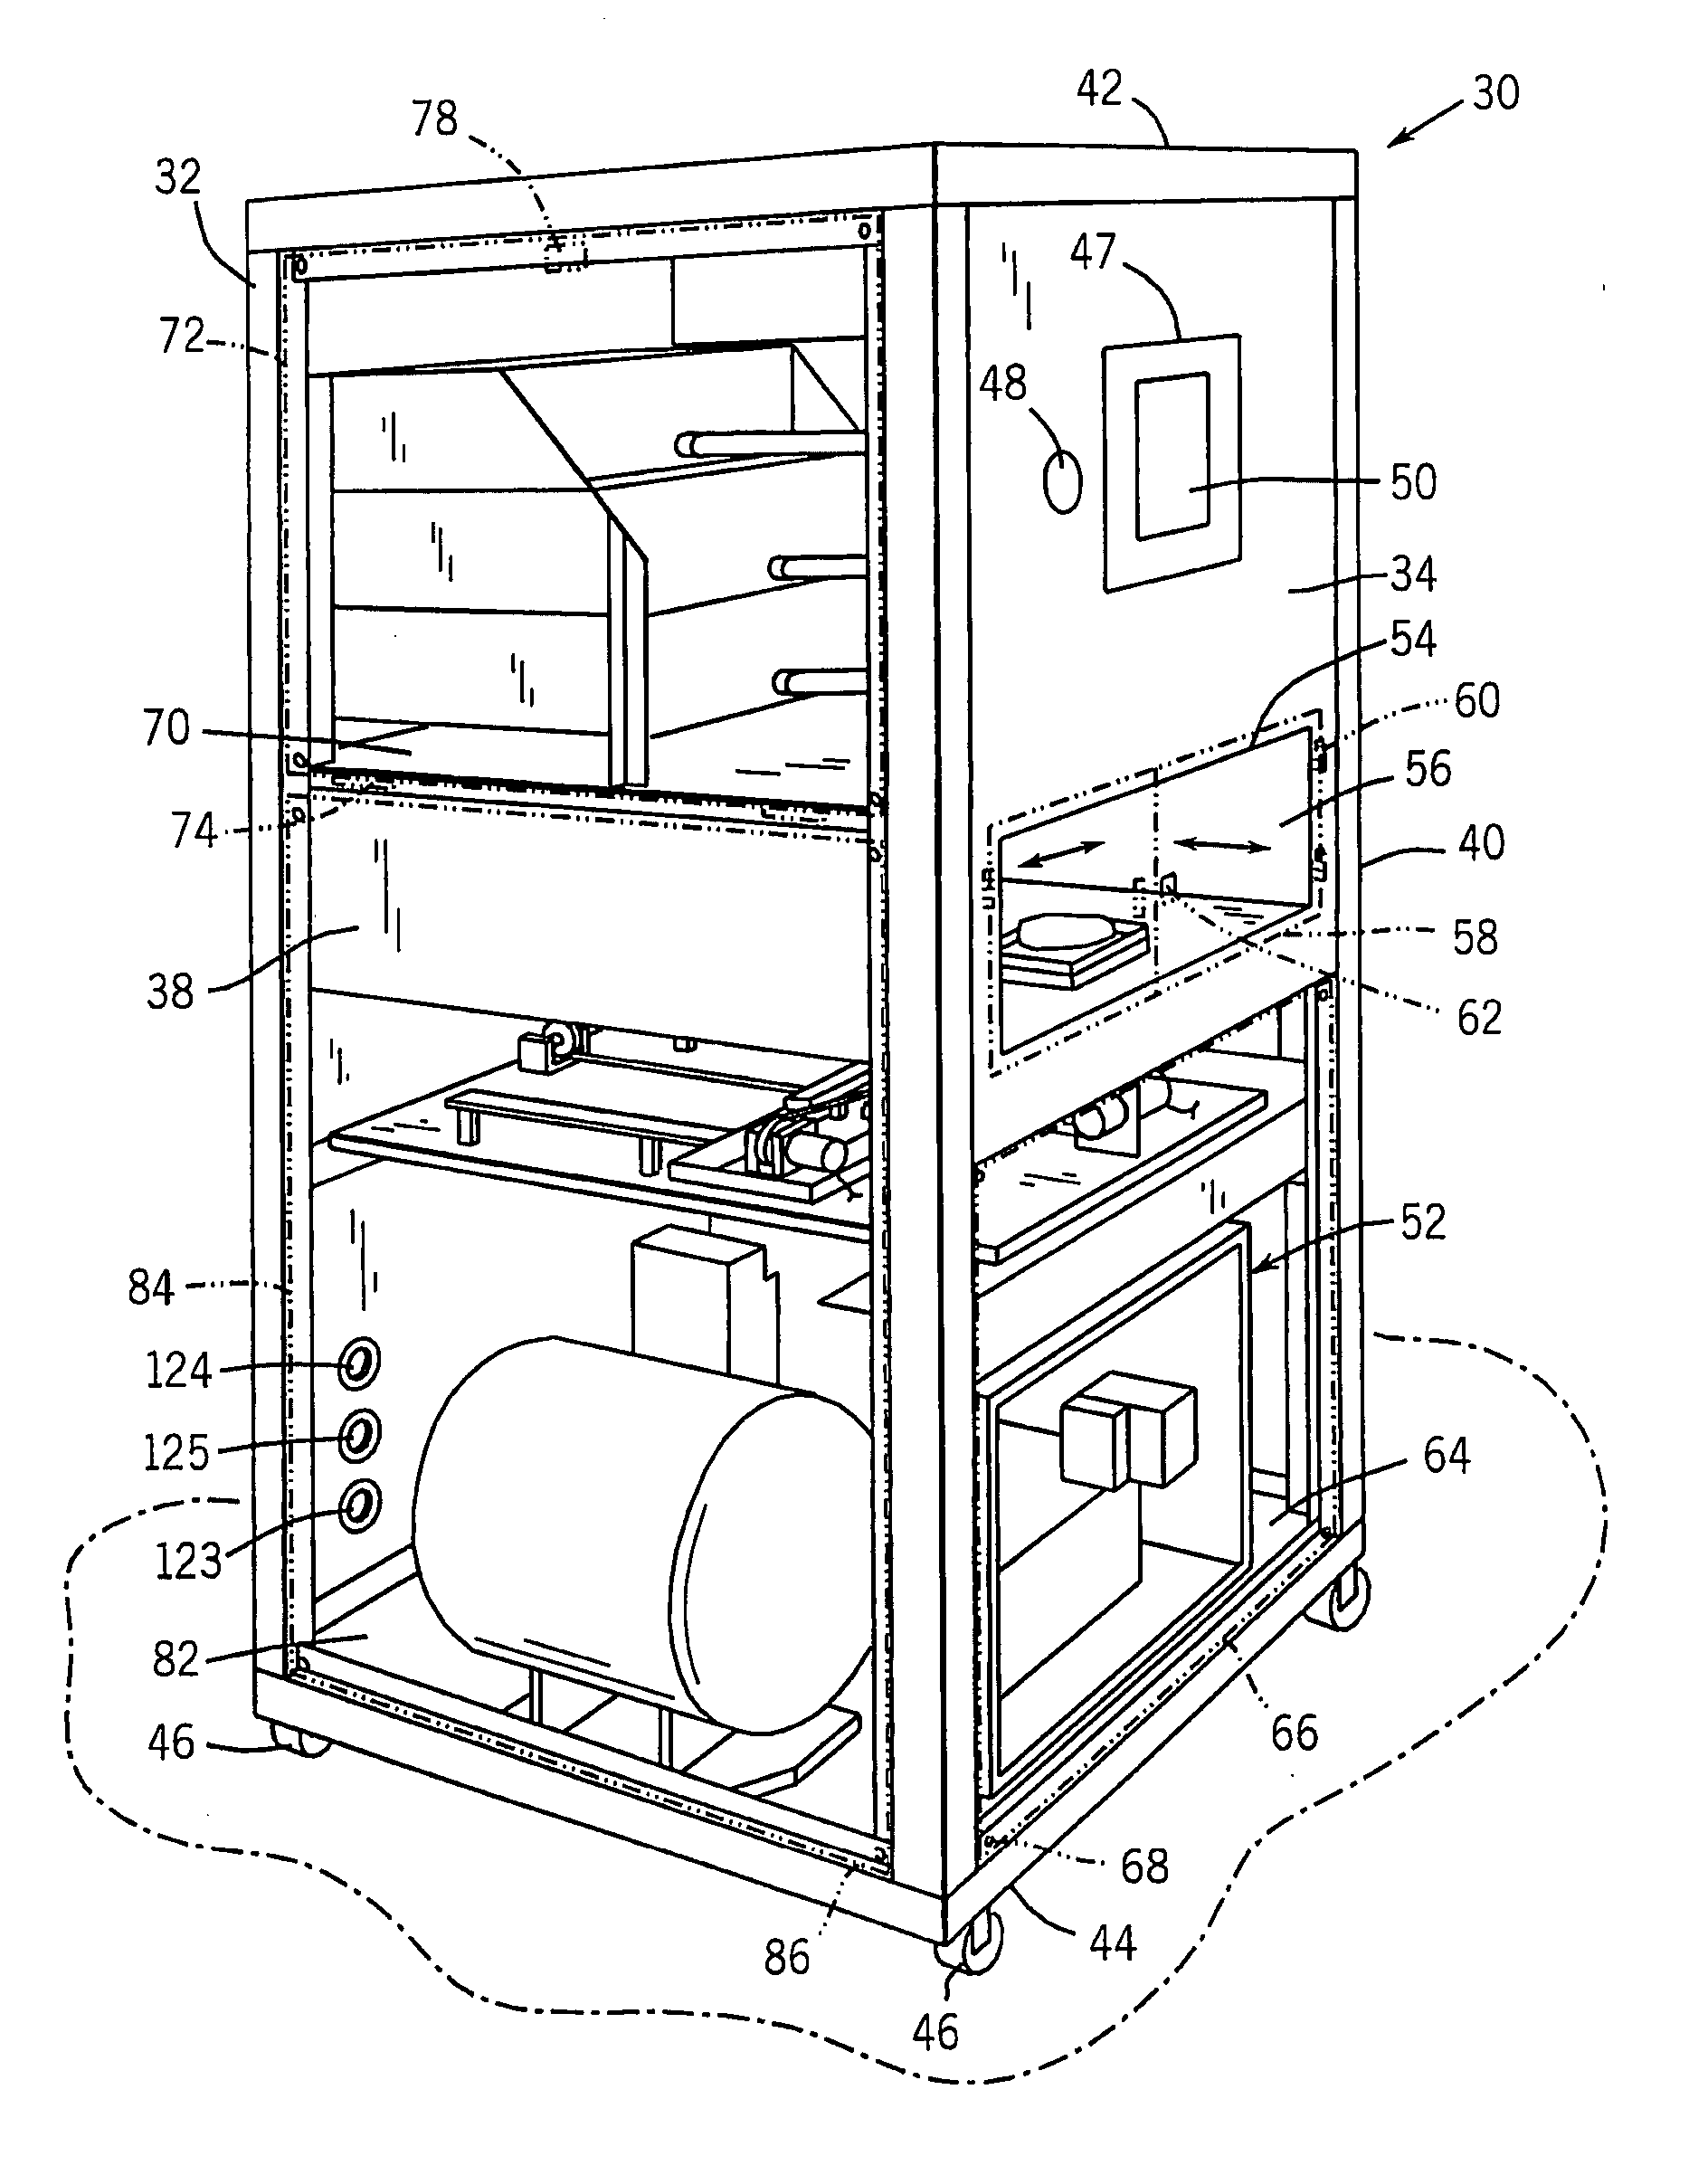 Needleless injection device and method of injecting